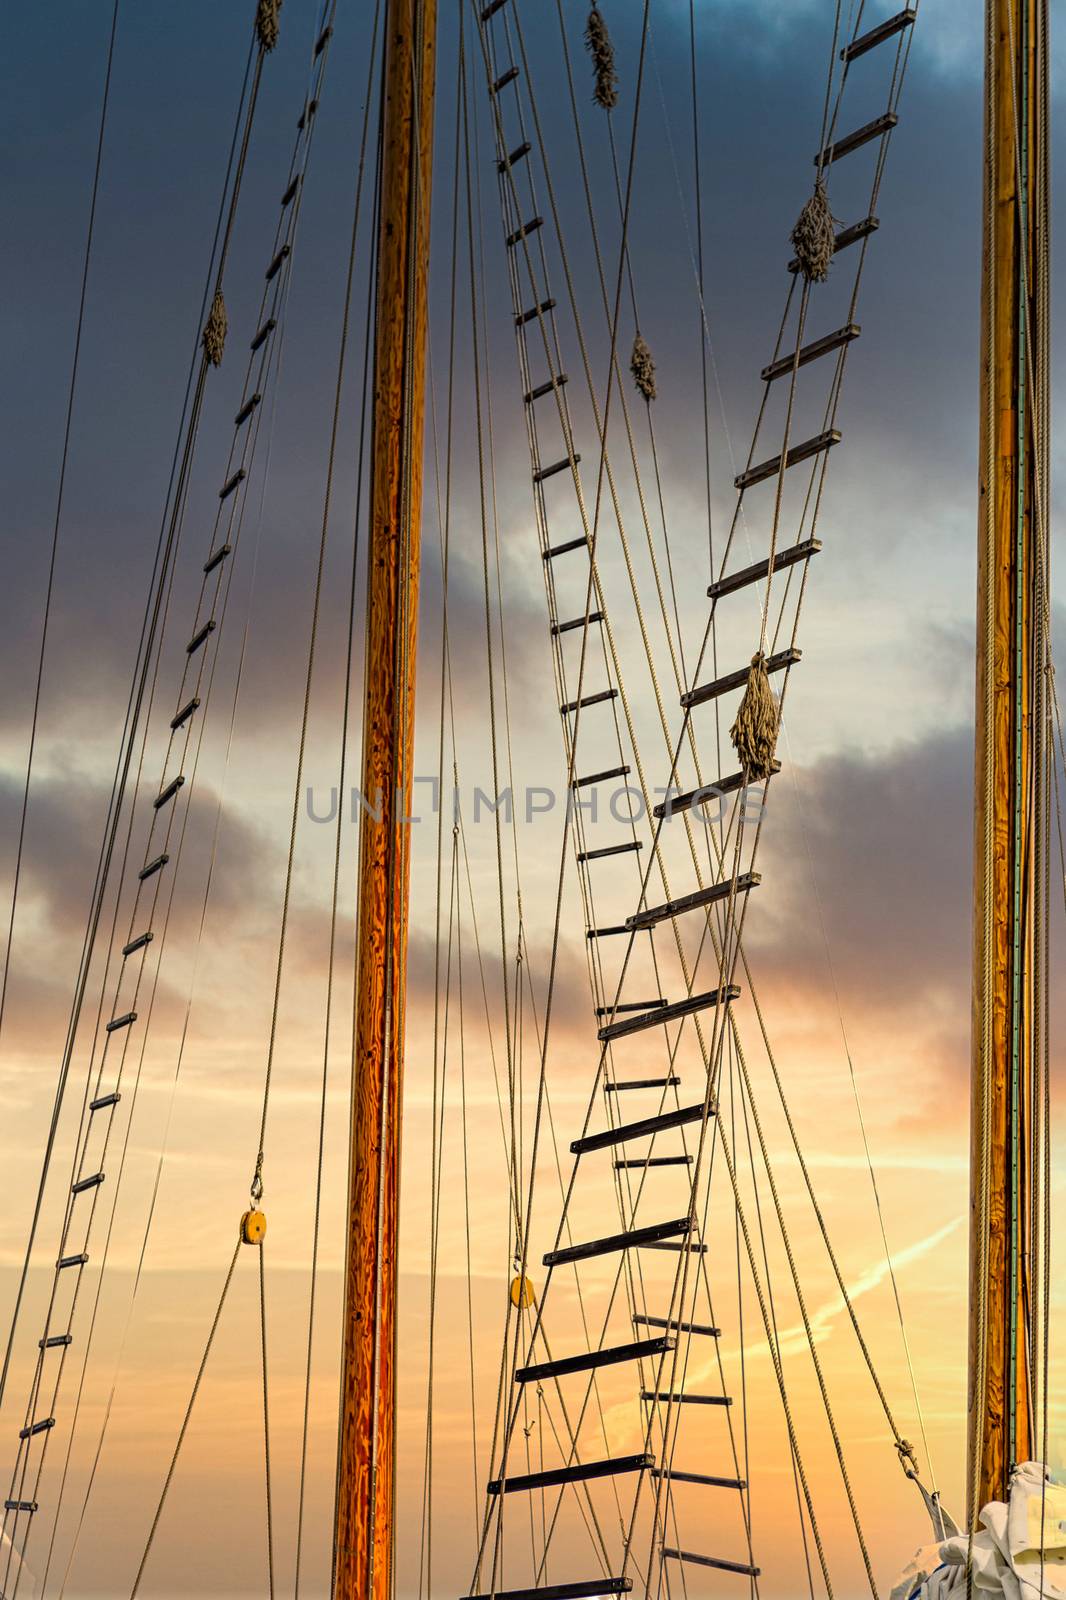 Jacobs Ladders on Masts at Sunset by dbvirago